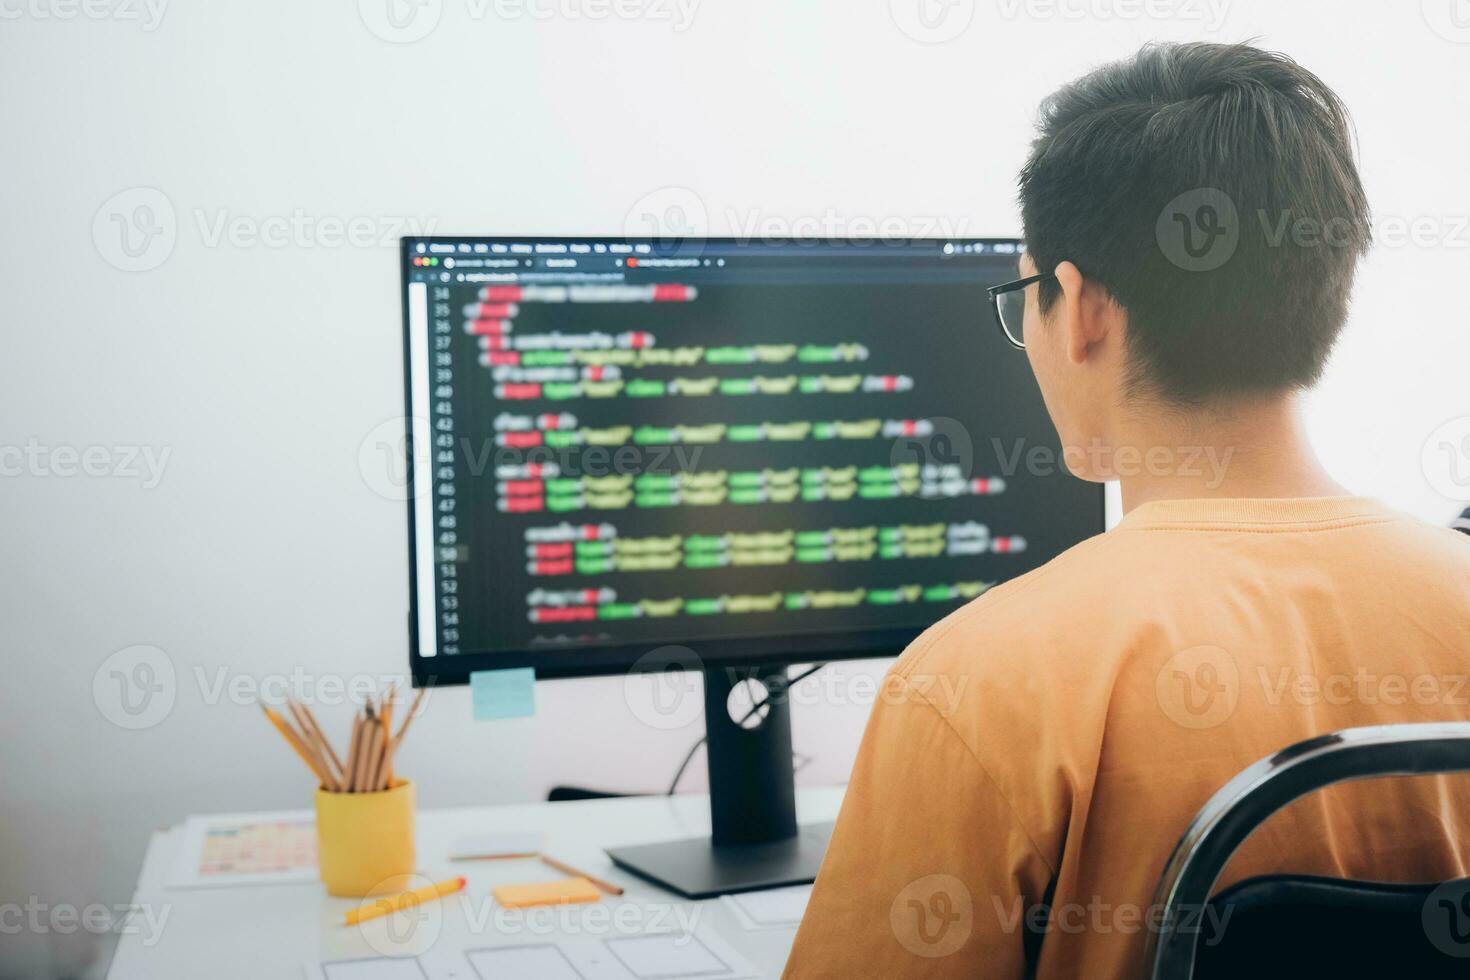 Programmers and developer teams are coding and developing software photo